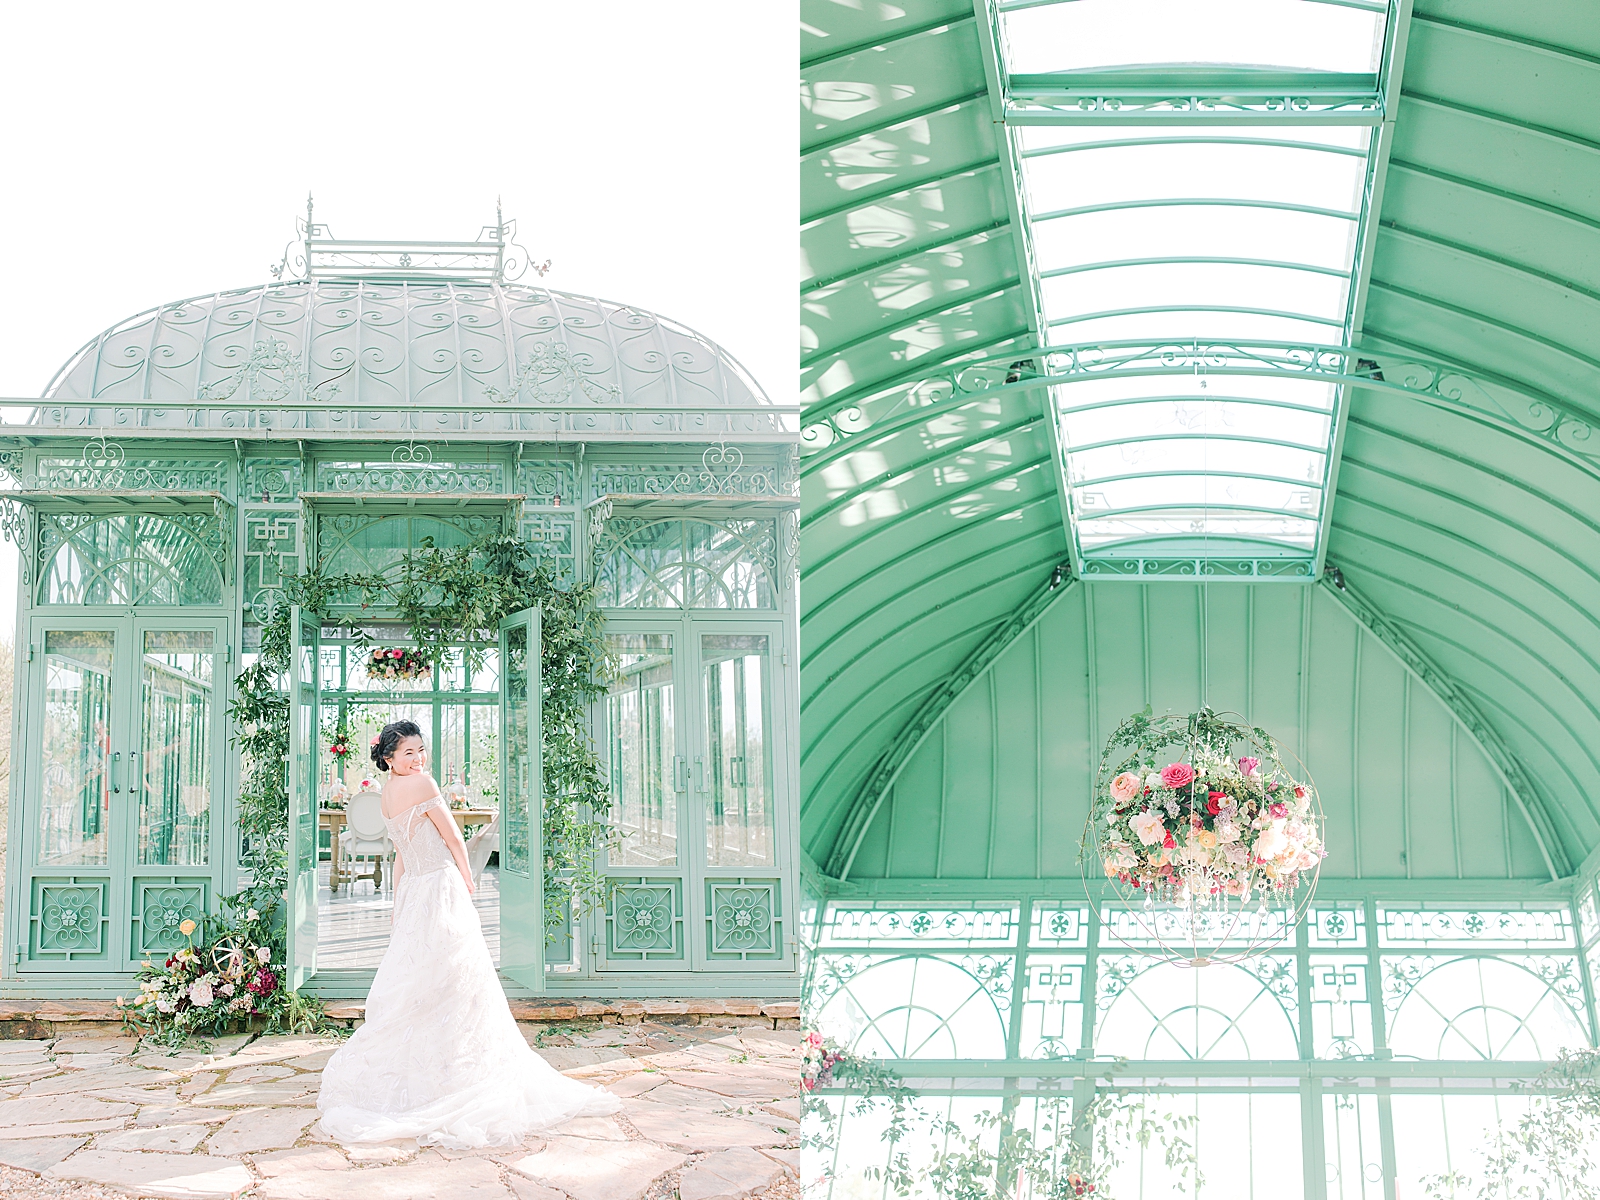 2400 On The River Bridal Session Lily in front of Greenhouse and Detail of greenhouse roof and floral chandelier Photos